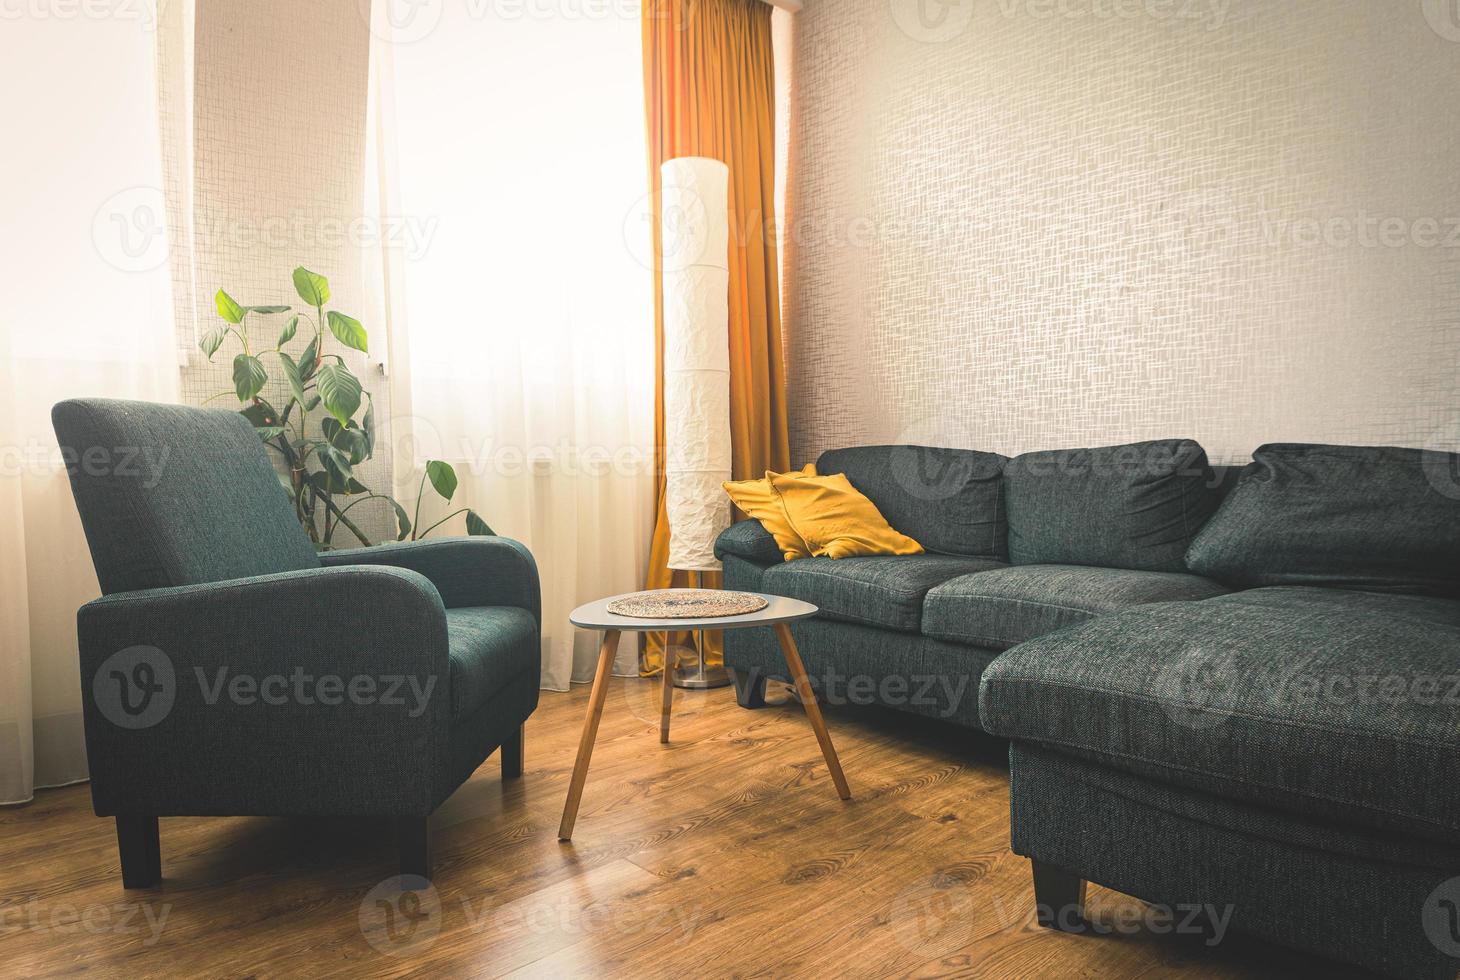 Cozy apartment living room with sofa and yellow pillows and stylisg table with book by flower and window with blue light outside in winter. Grey armchair .opy paste wall background photo